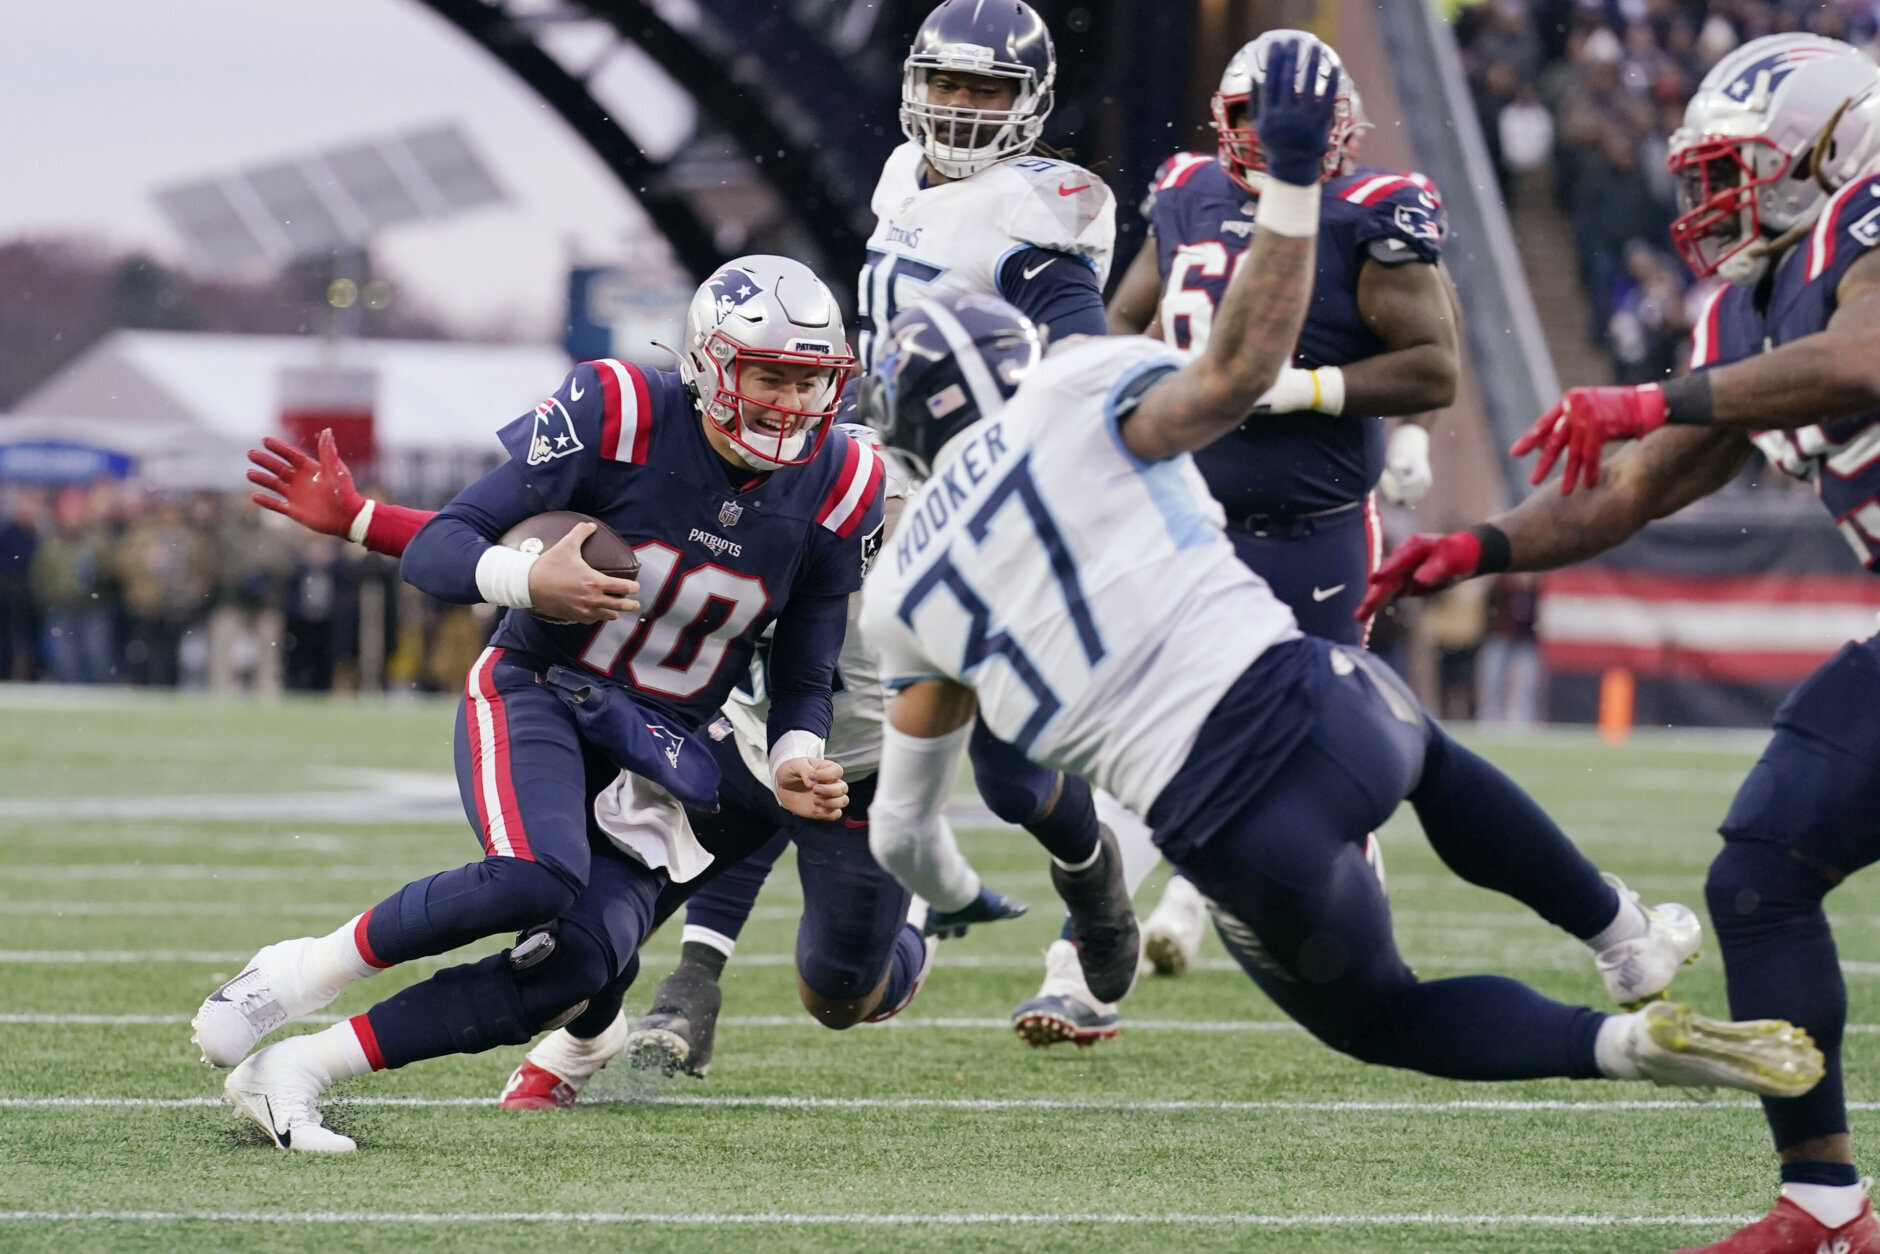 <p><em><strong>Titans 13</strong></em><br />
<em><strong>Patriots 36</strong></em></p>
<p>At this point, is there any question Mac Jones is the Offensive Rookie of the Year? The only other rookie QBs in the last 15 years to win six straight starts were Dak Prescott (2016) and Robert Griffin III (2012) — both of whom went on to win OROY. The Pats are back and no one outside of New England is happy about it.</p>
